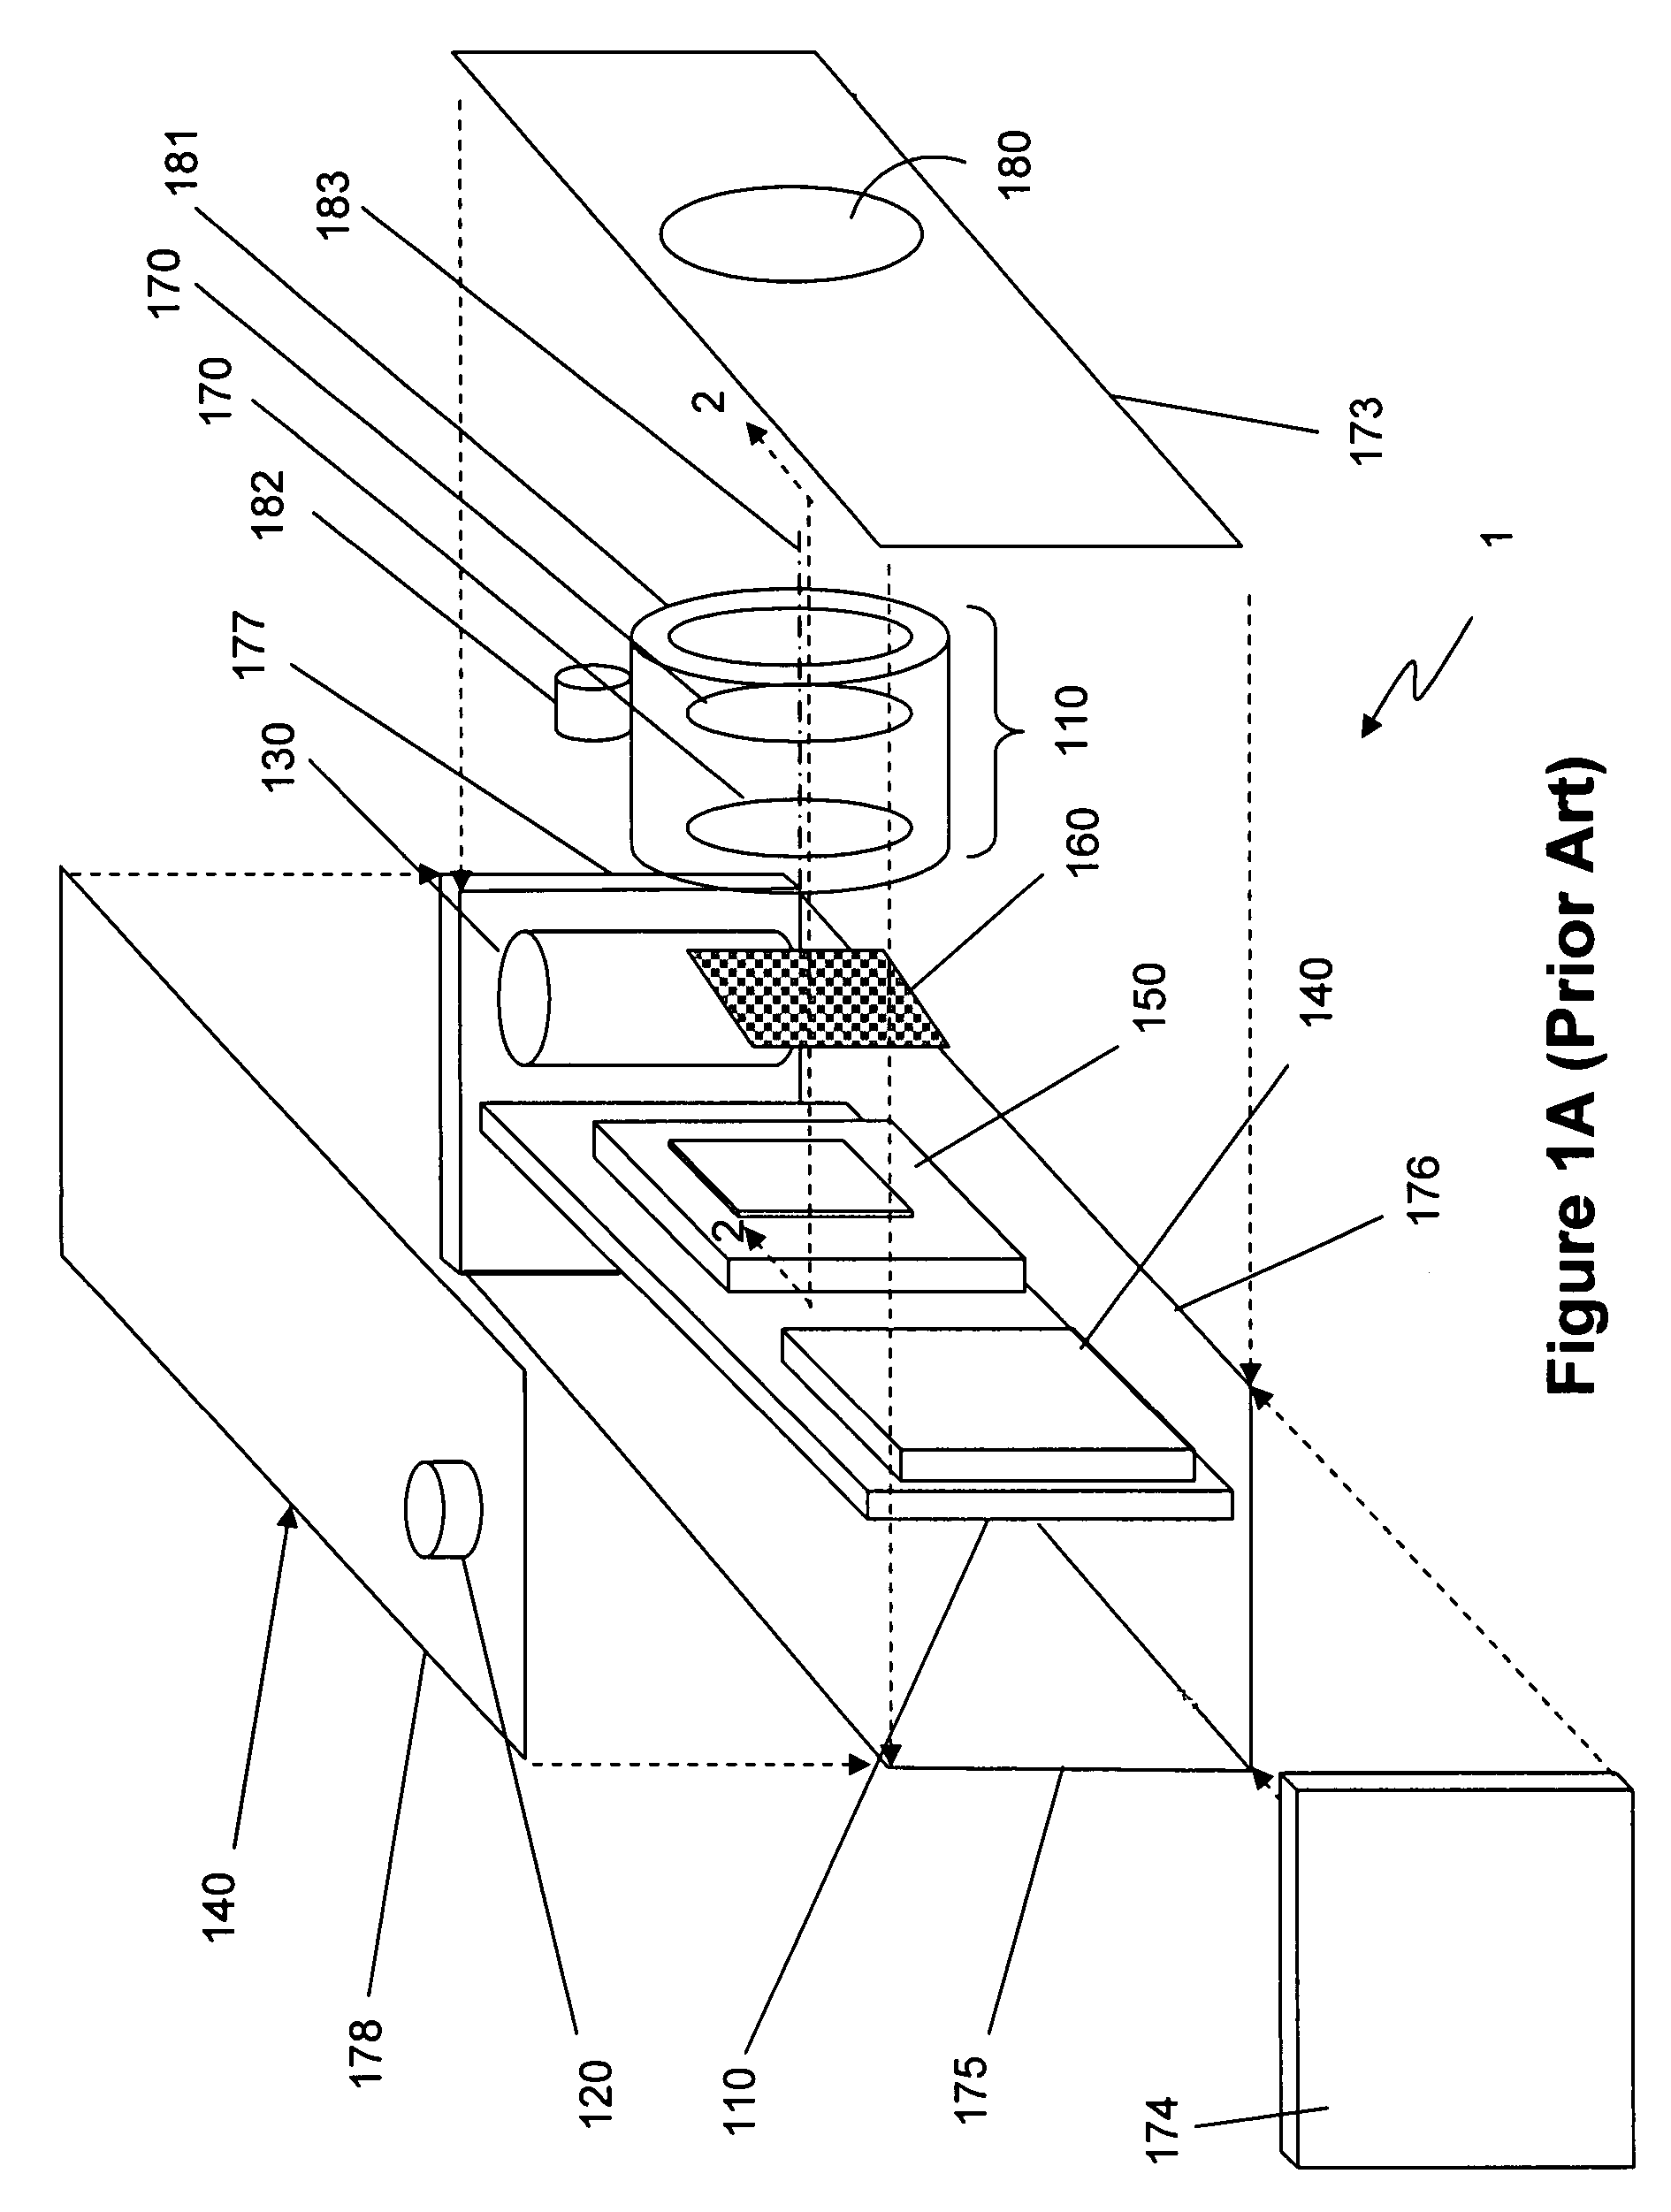 Digital camera with integrated infrared (IR) response